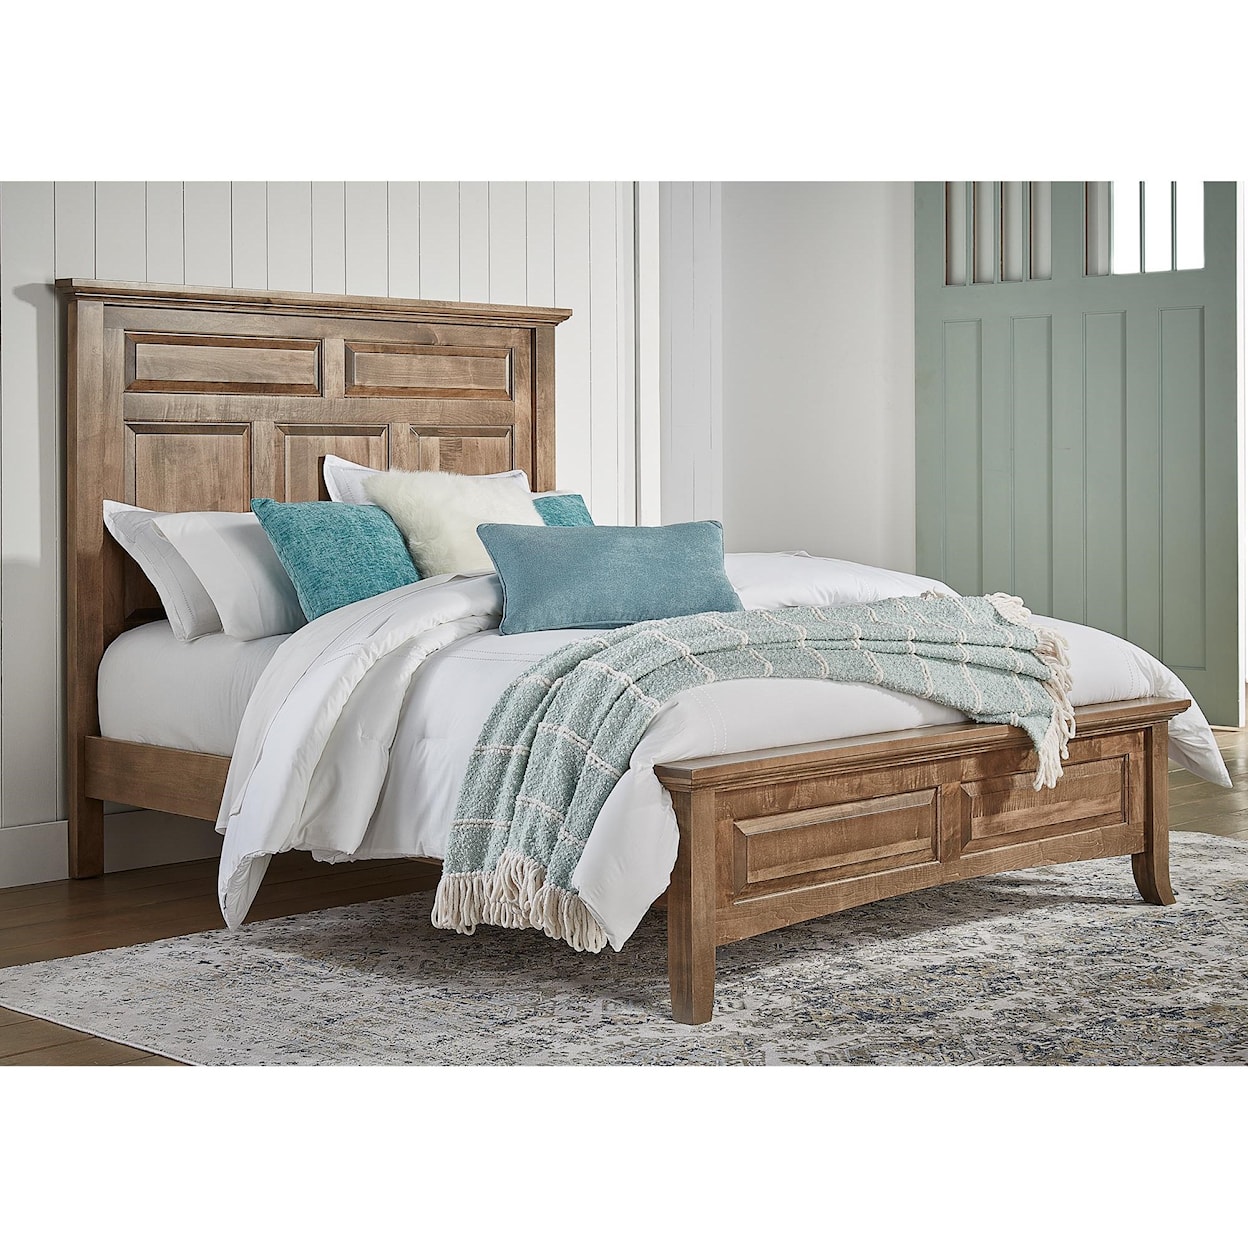 Archbold Furniture Provence Maple Collection King Panel Bed